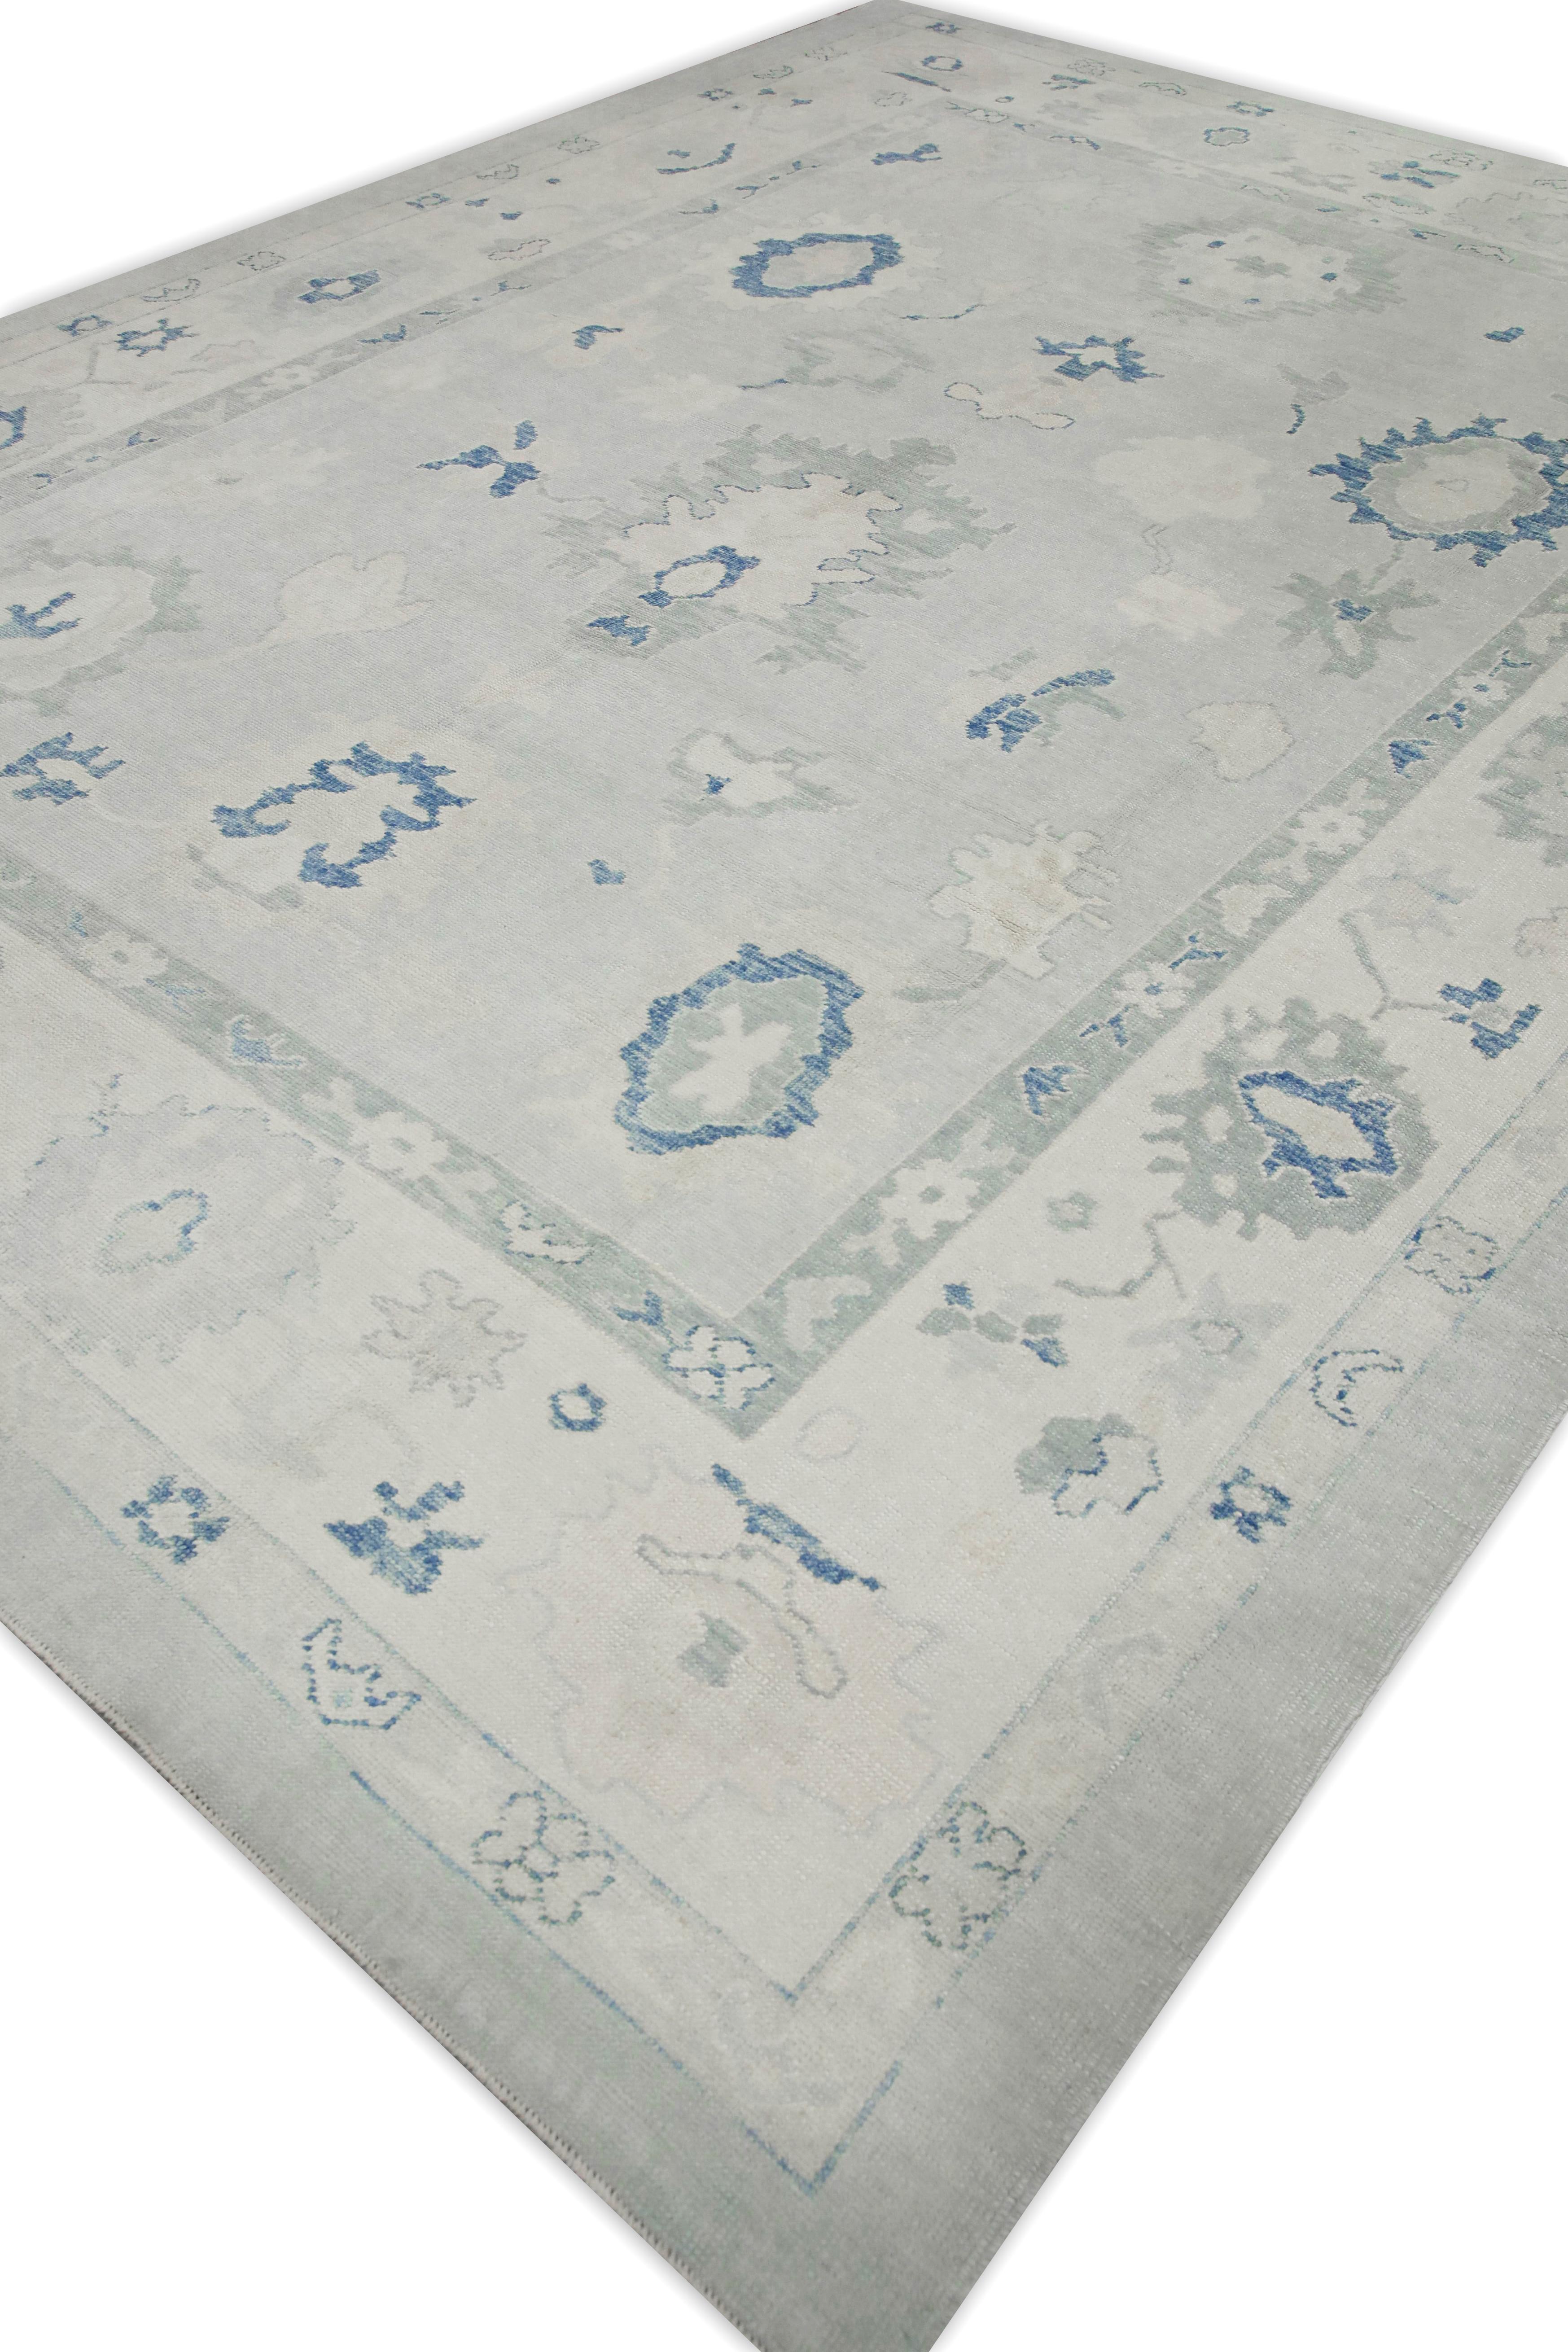 Contemporary Soft Blue Floral Design Handwoven Wool Turkish Oushak Rug 10'4